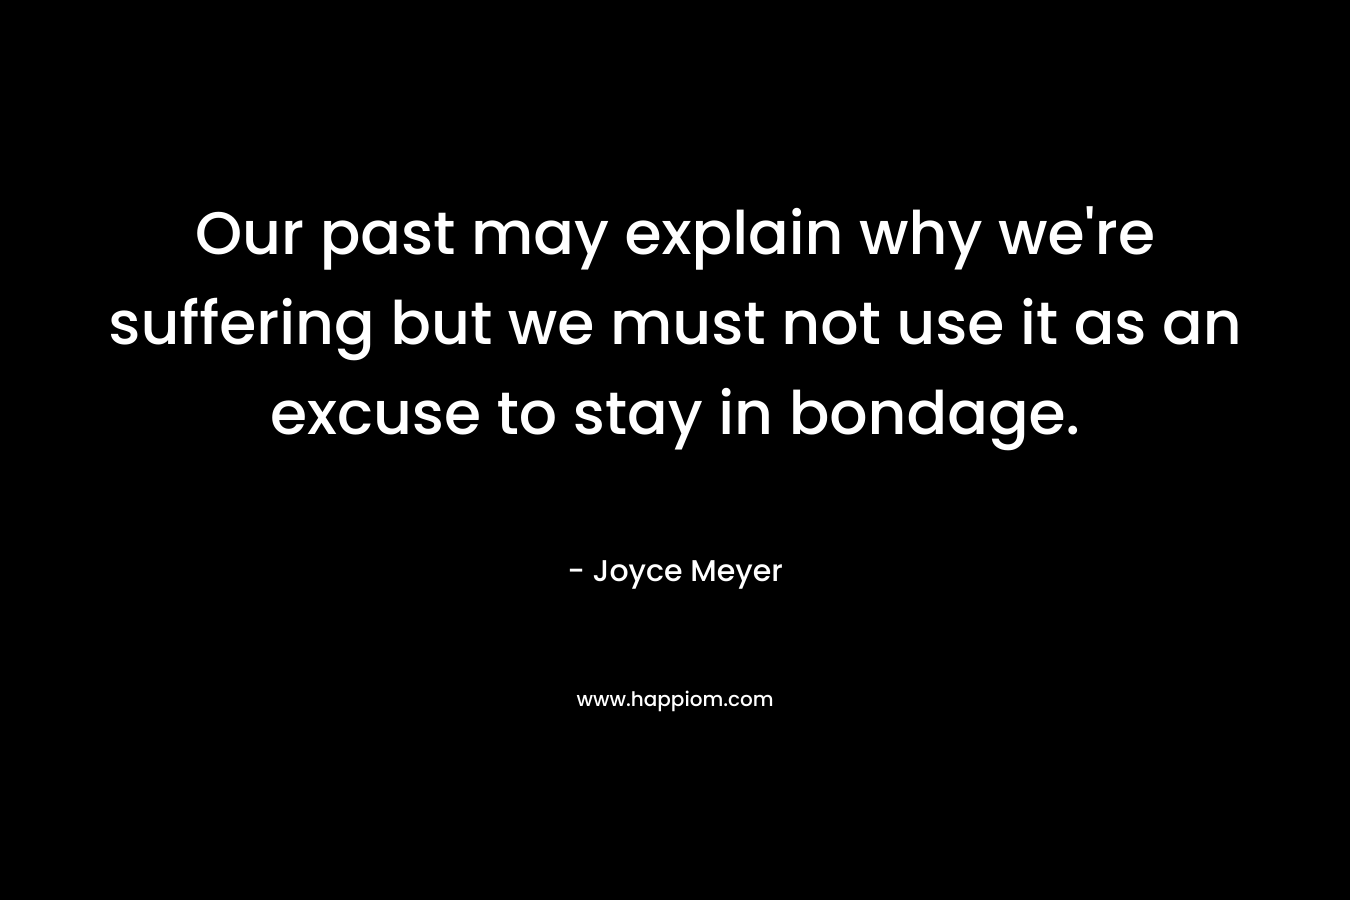 Our past may explain why we’re suffering but we must not use it as an excuse to stay in bondage. – Joyce Meyer